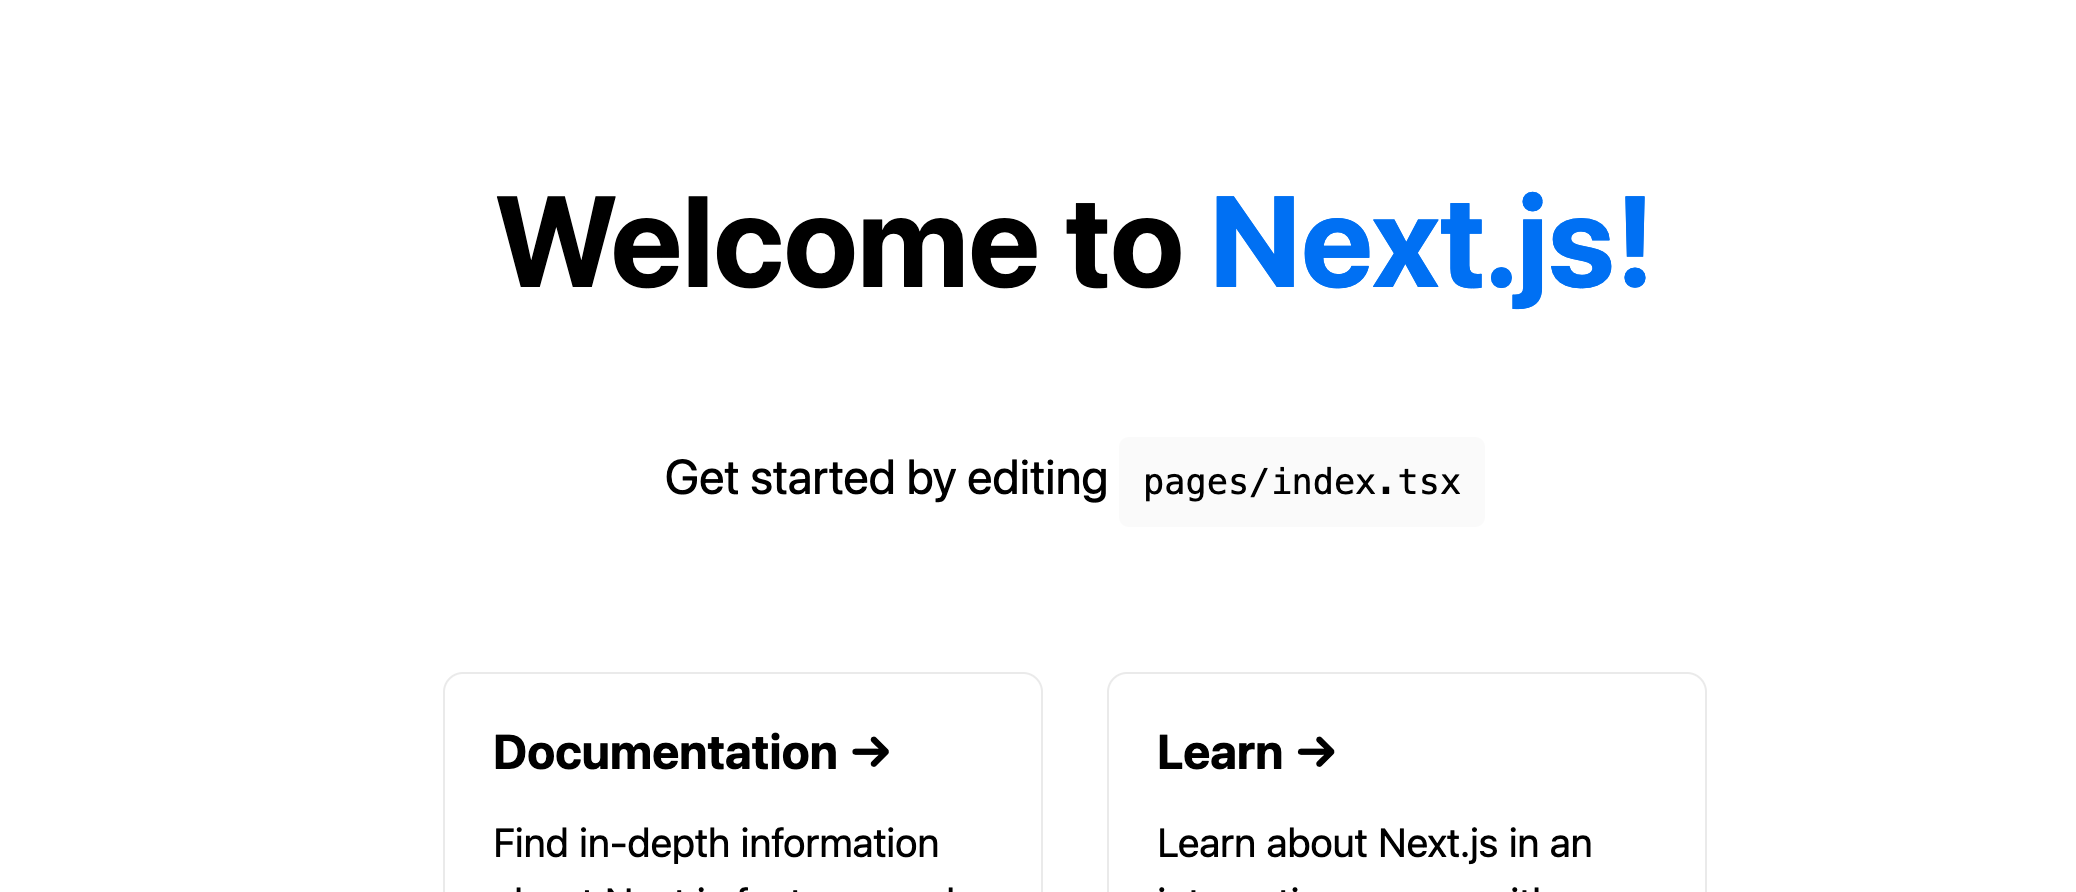 Welcome to Next.js!